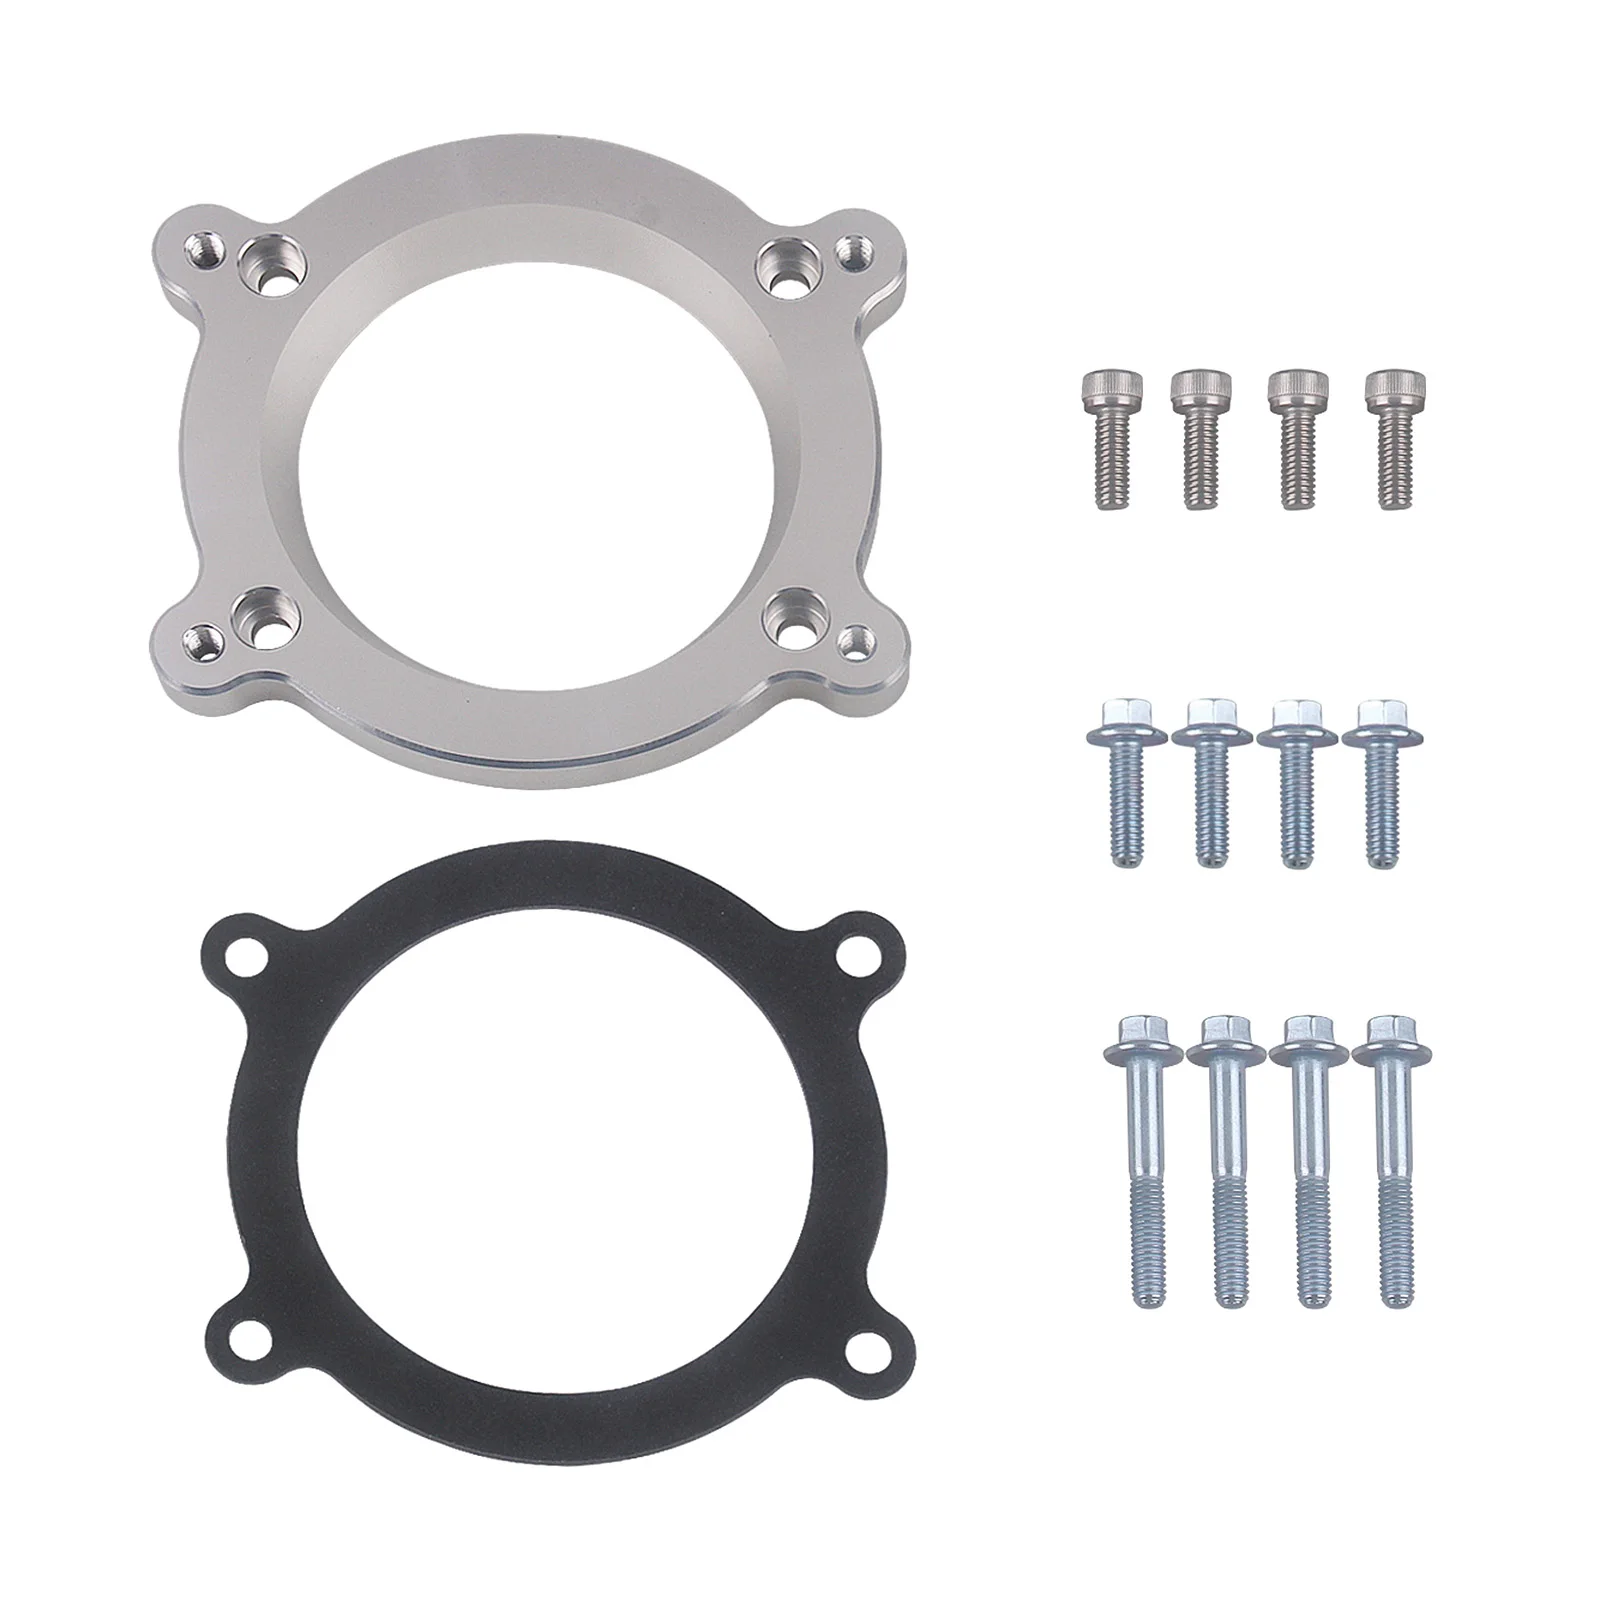 LS4 Intake Manifold to LS3 DBW Throttle Body Adapter Plate Kit Replacement